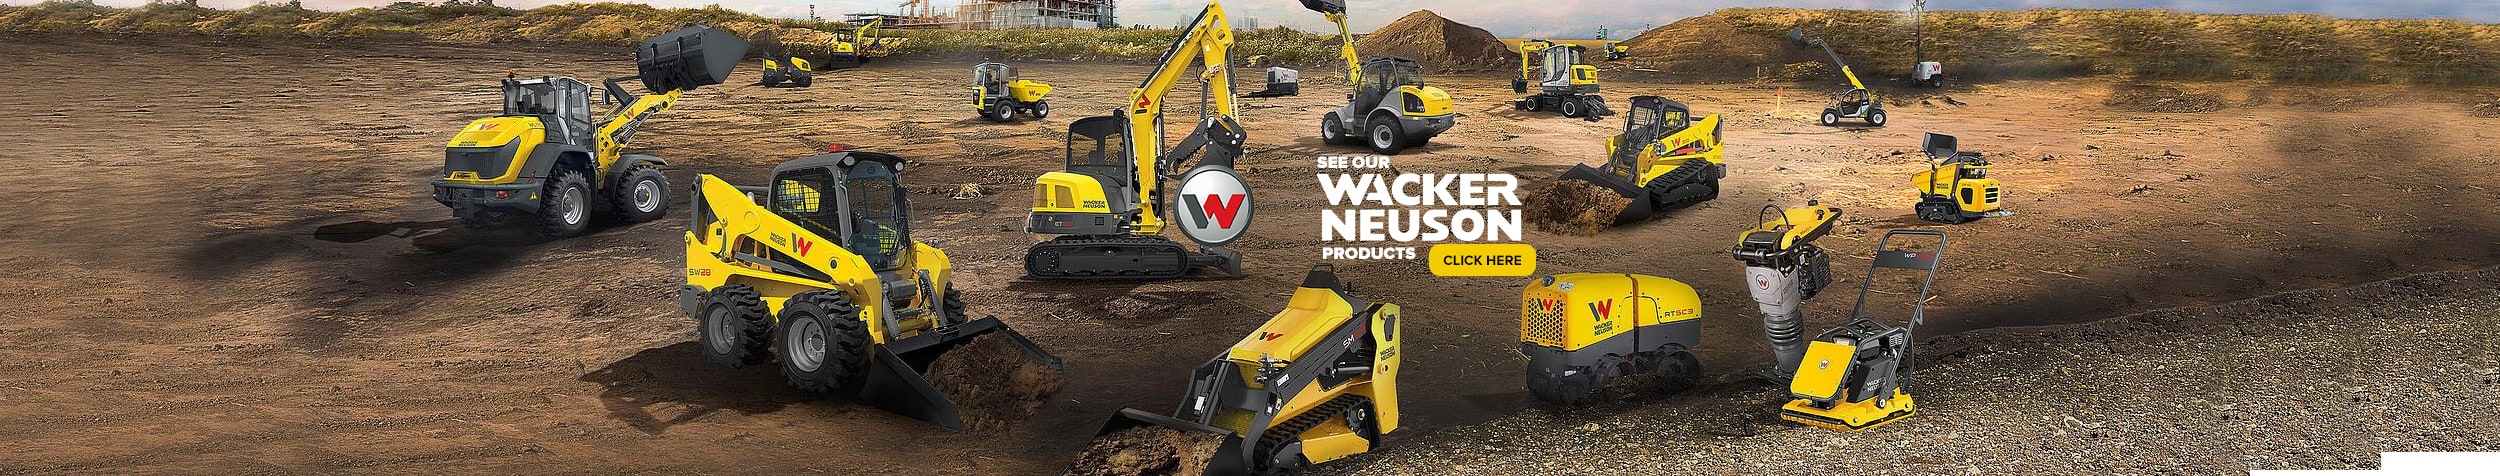 Discover unmatched efficiency with our cutting-edge Wacker Neuson products!